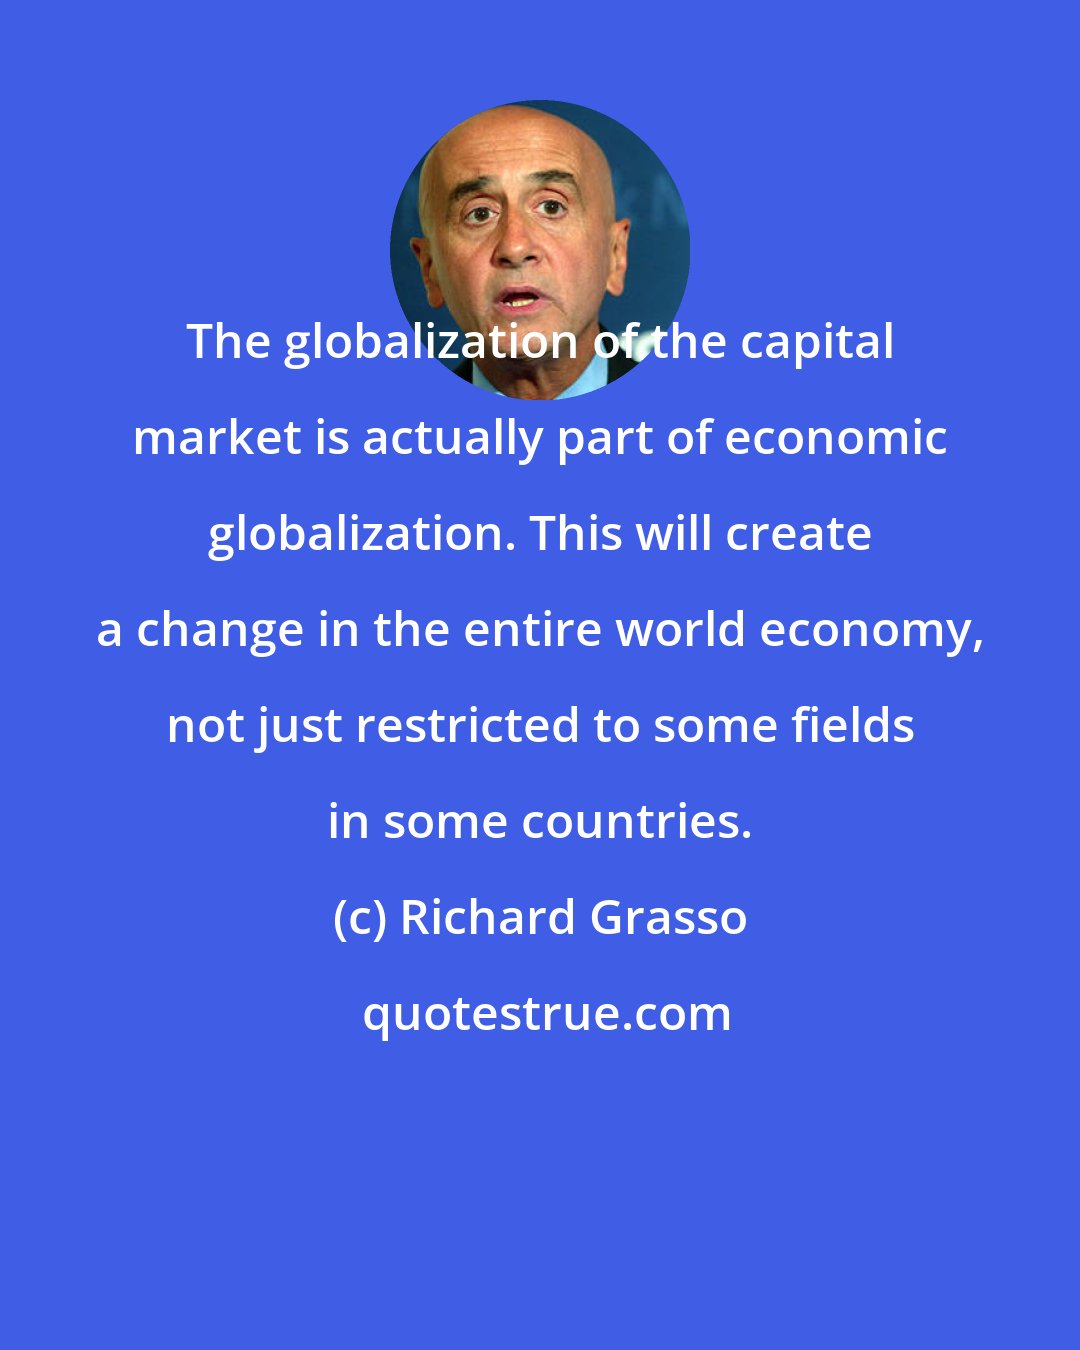 Richard Grasso: The globalization of the capital market is actually part of economic globalization. This will create a change in the entire world economy, not just restricted to some fields in some countries.